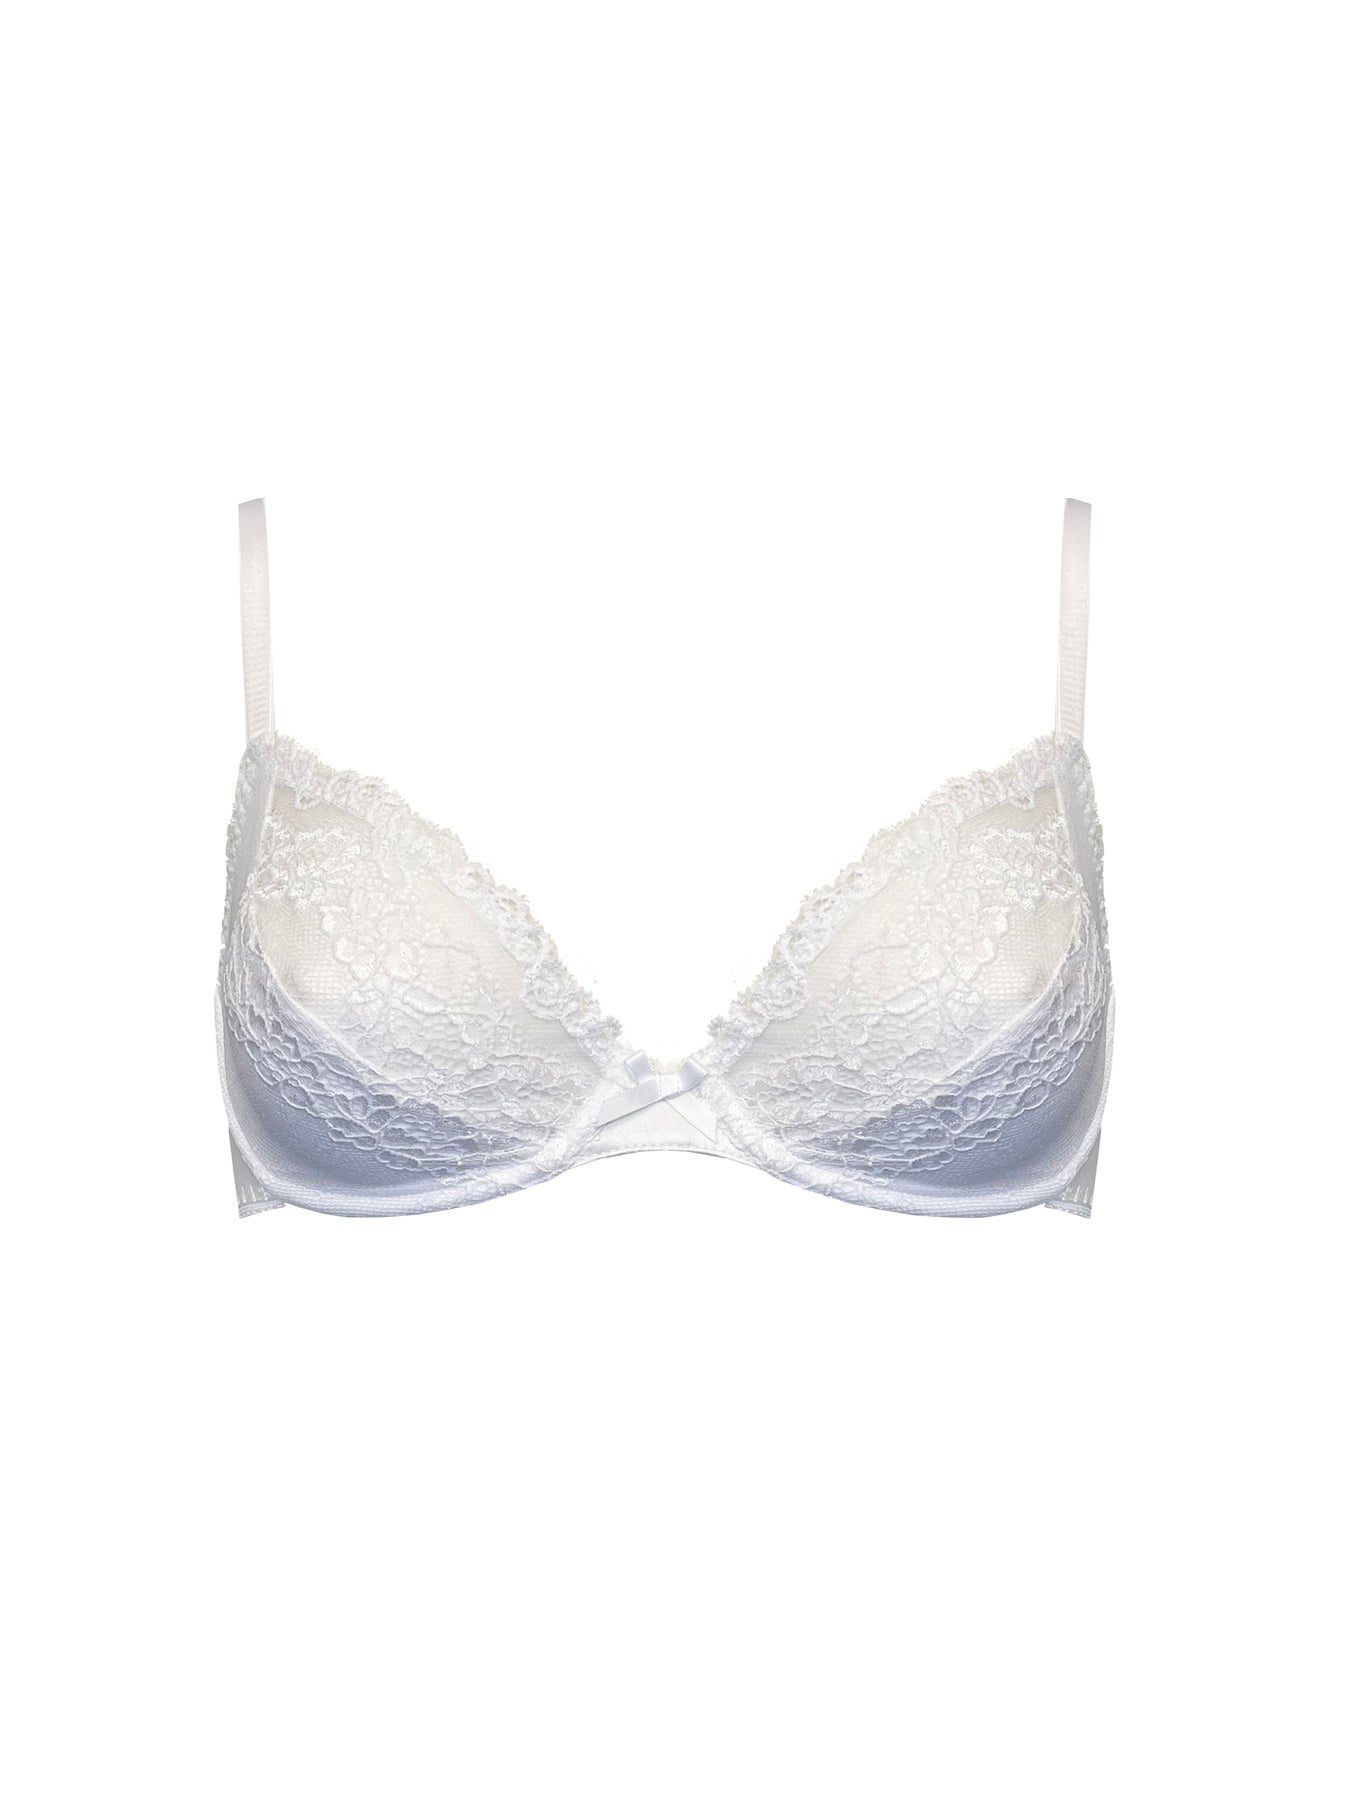 Cacique Vintage intimates white lace no padding bra, size 40D GUC - $30 -  From Jessica